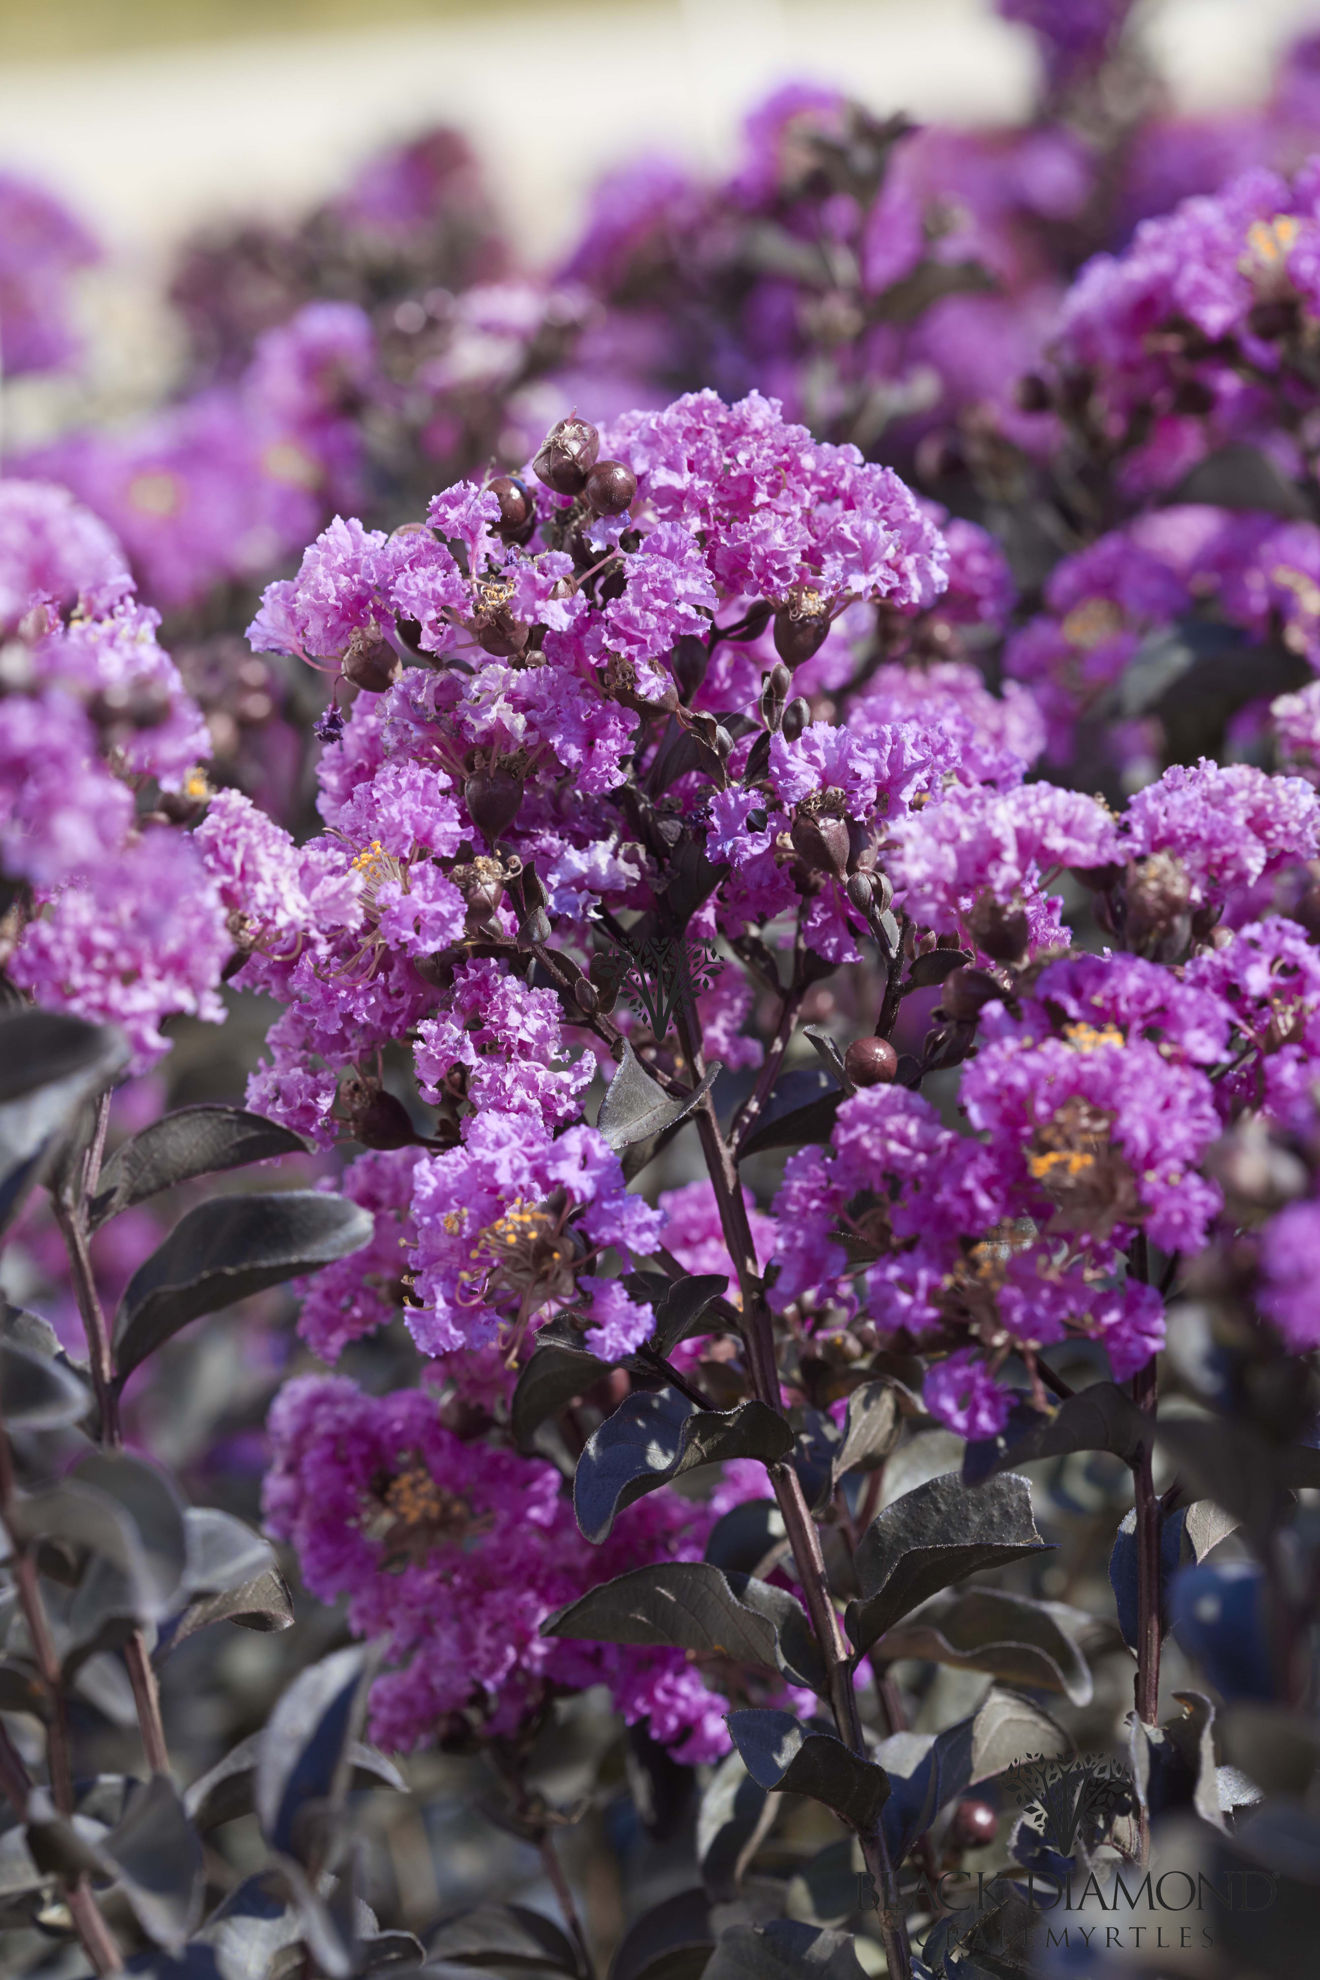 https://www.breederplants.nl/images/thumbs/0002025_Lagerstroemia 'Purely Purple' (1).jpeg